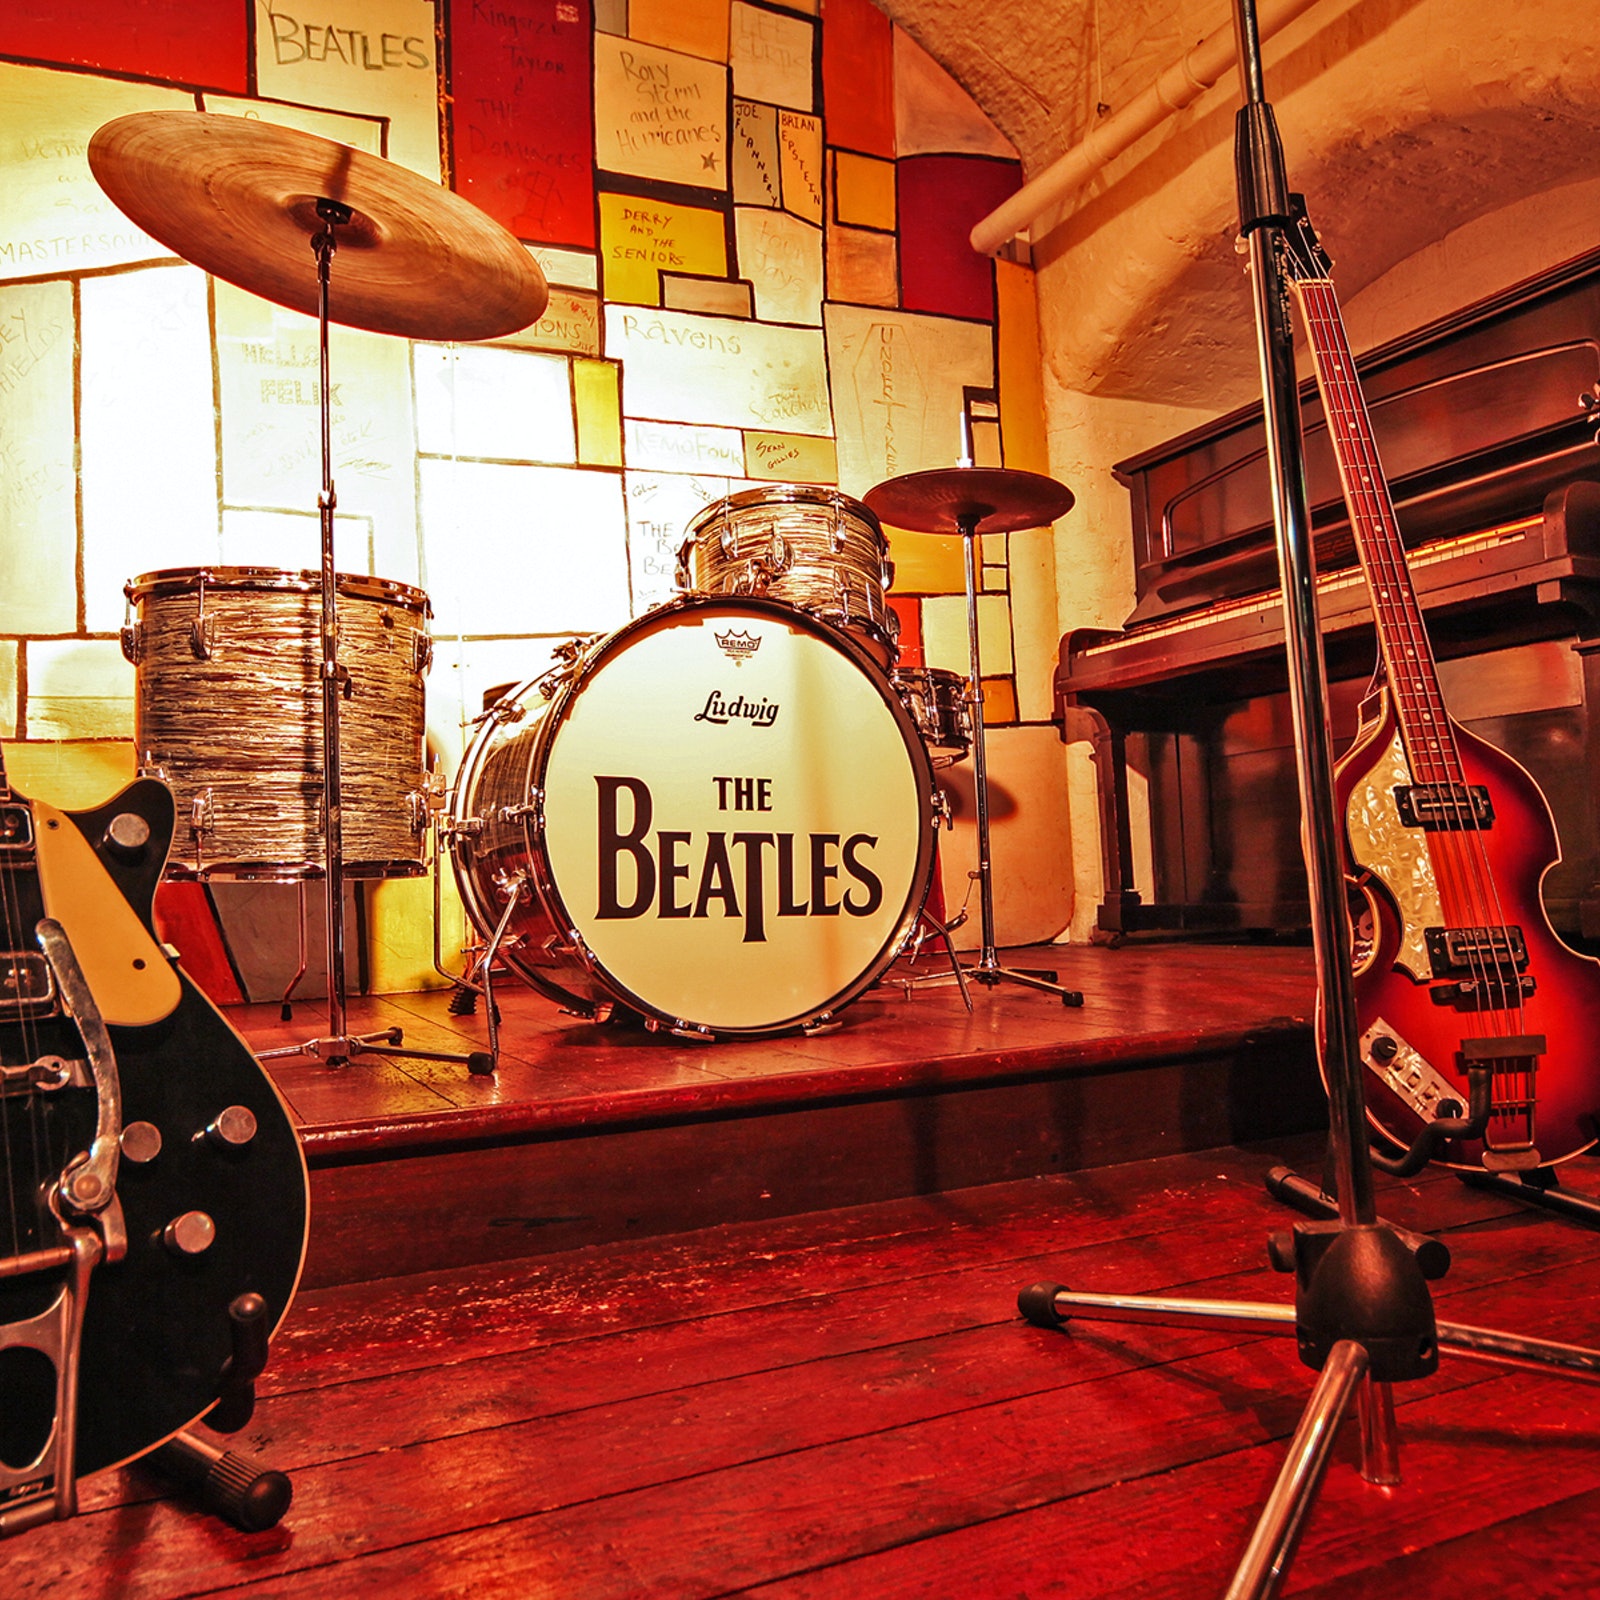 The Beatles Story in United Kingdom